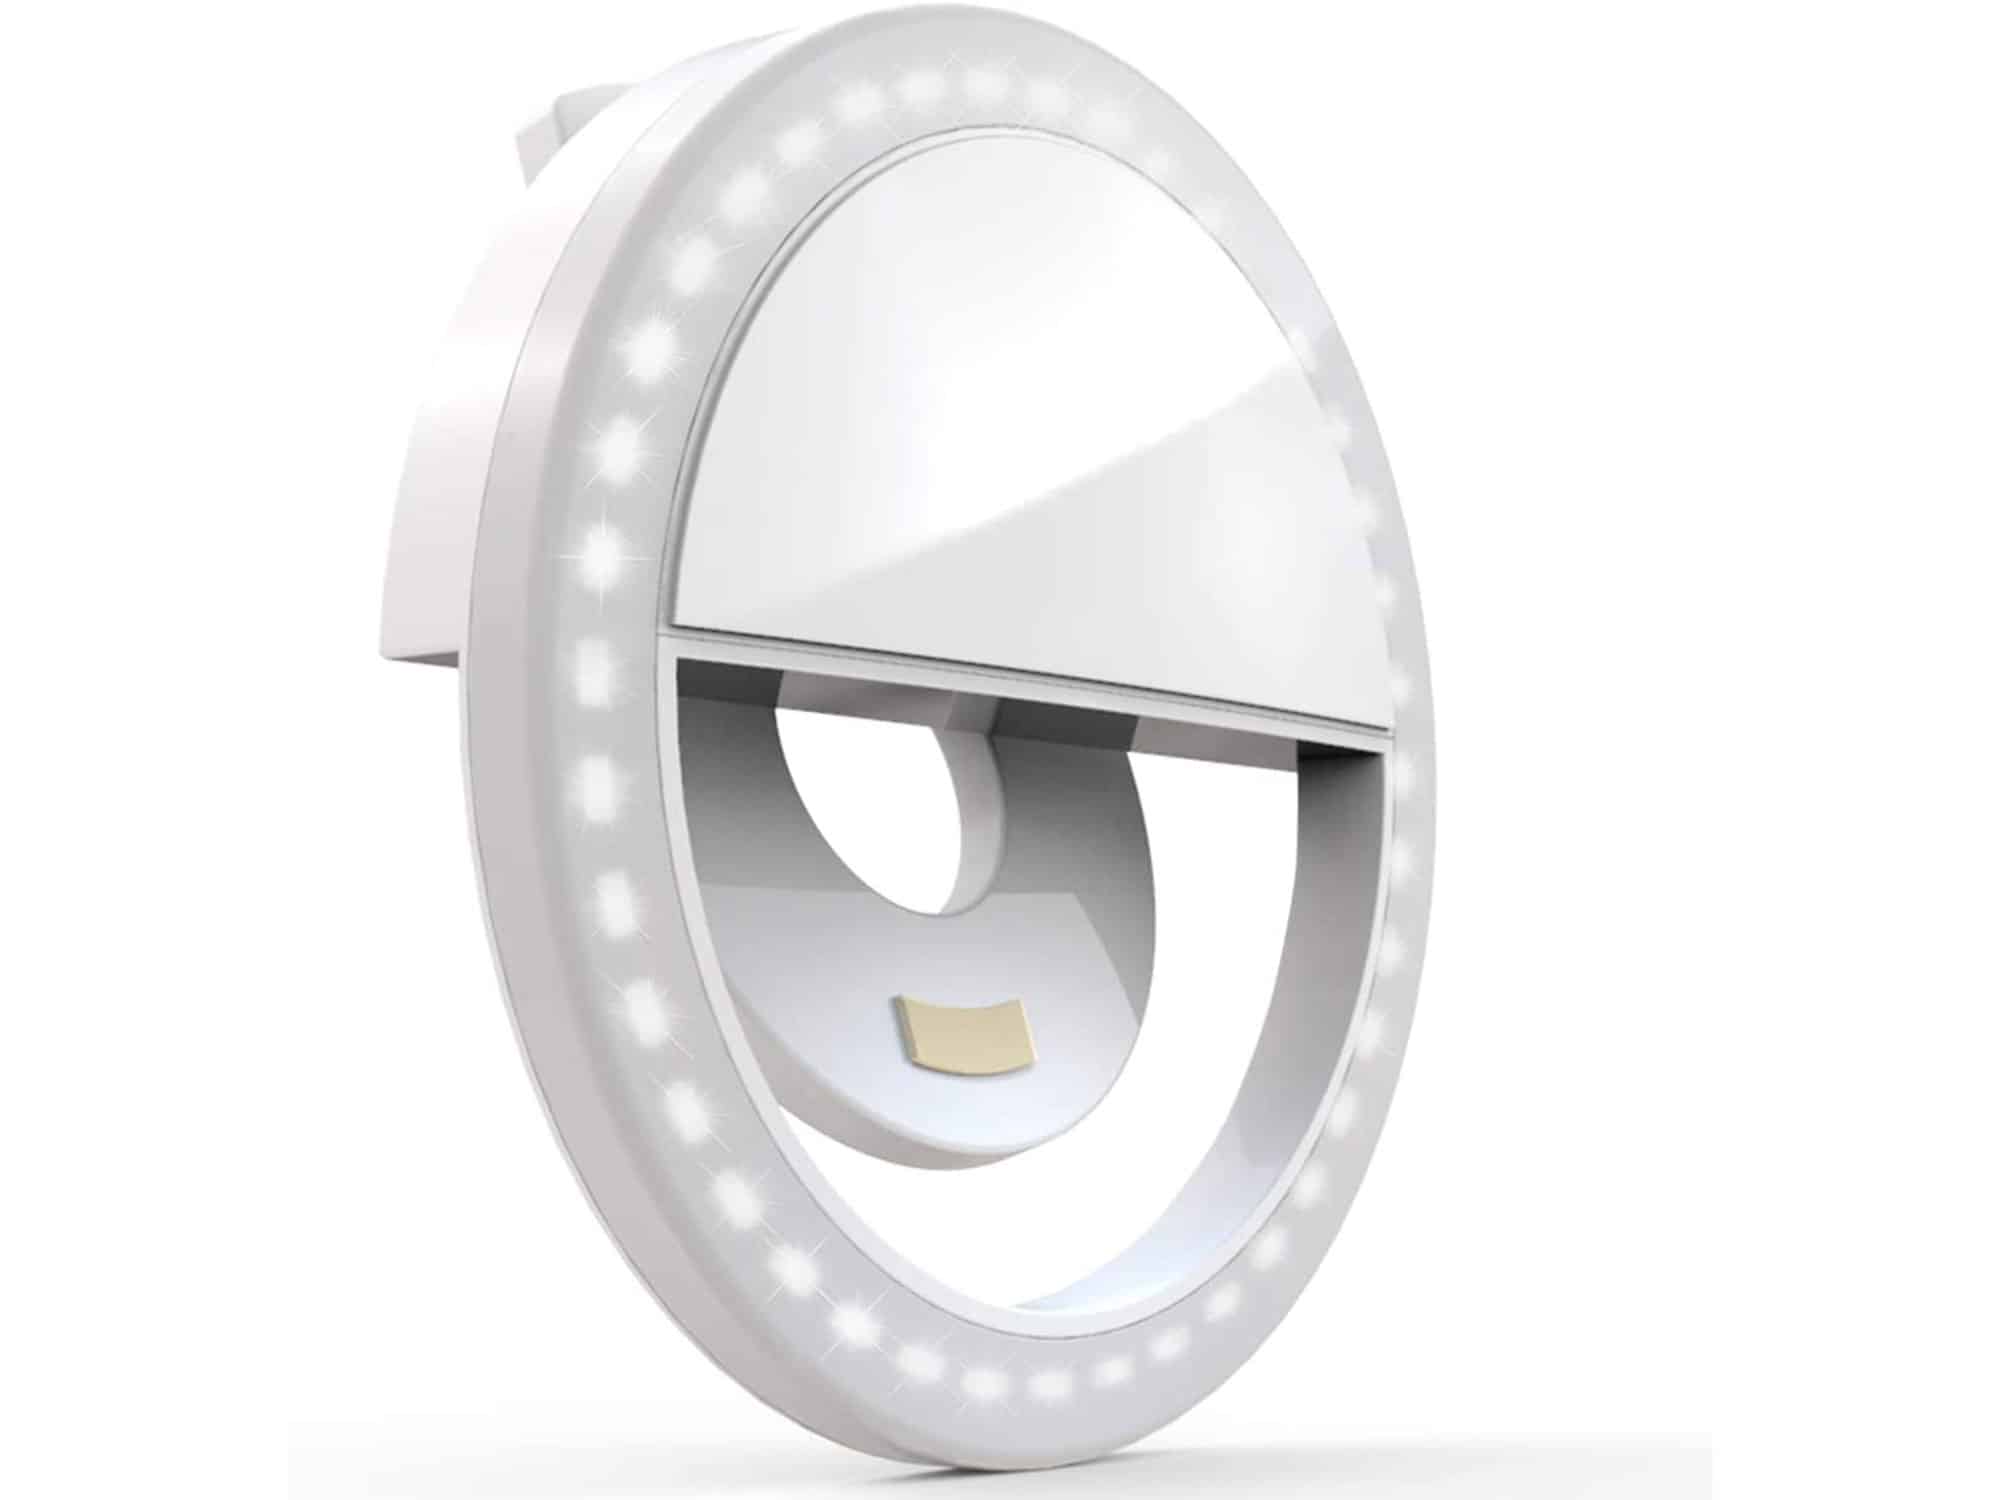 Auxiwa Clip on Selfie Ring Light [Rechargeable Battery] with 36 LED for Smart Phone Camera Round Shape, White